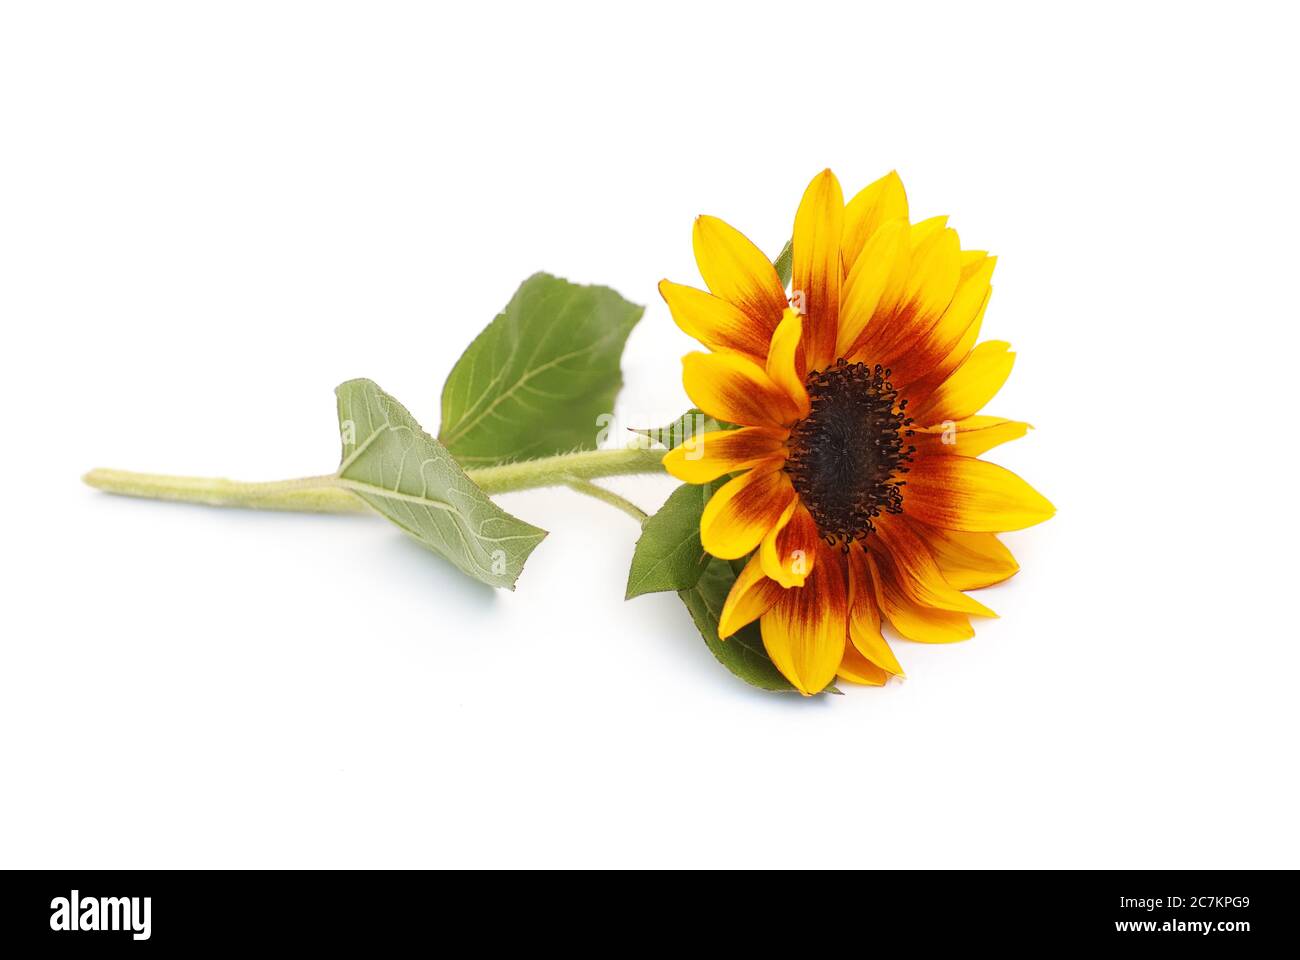 Isolated sunflower lies on a white background Stock Photo